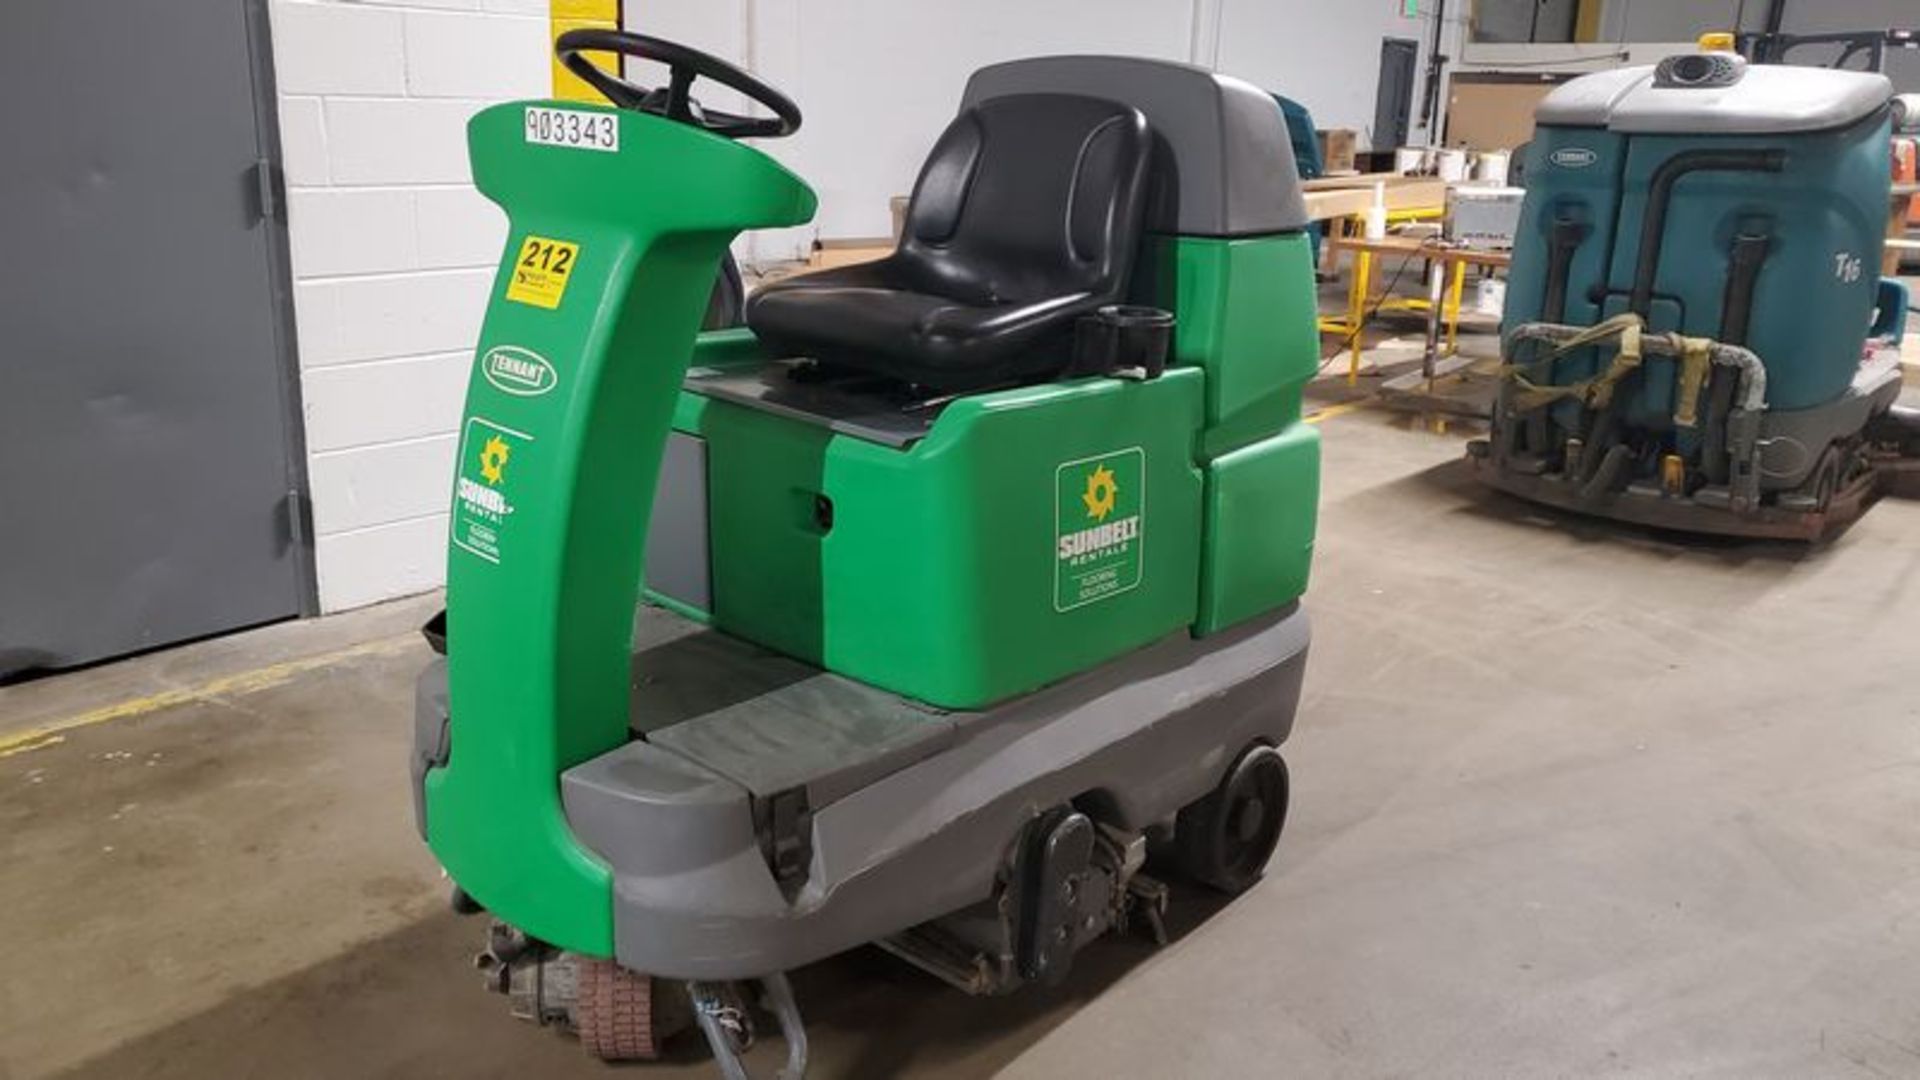 TENNANT MODEL R14 RIDING ELECTRIC FLOOR SCRUBBER, S/N R14-10805418, 187 HOURS ON METER - Image 2 of 9